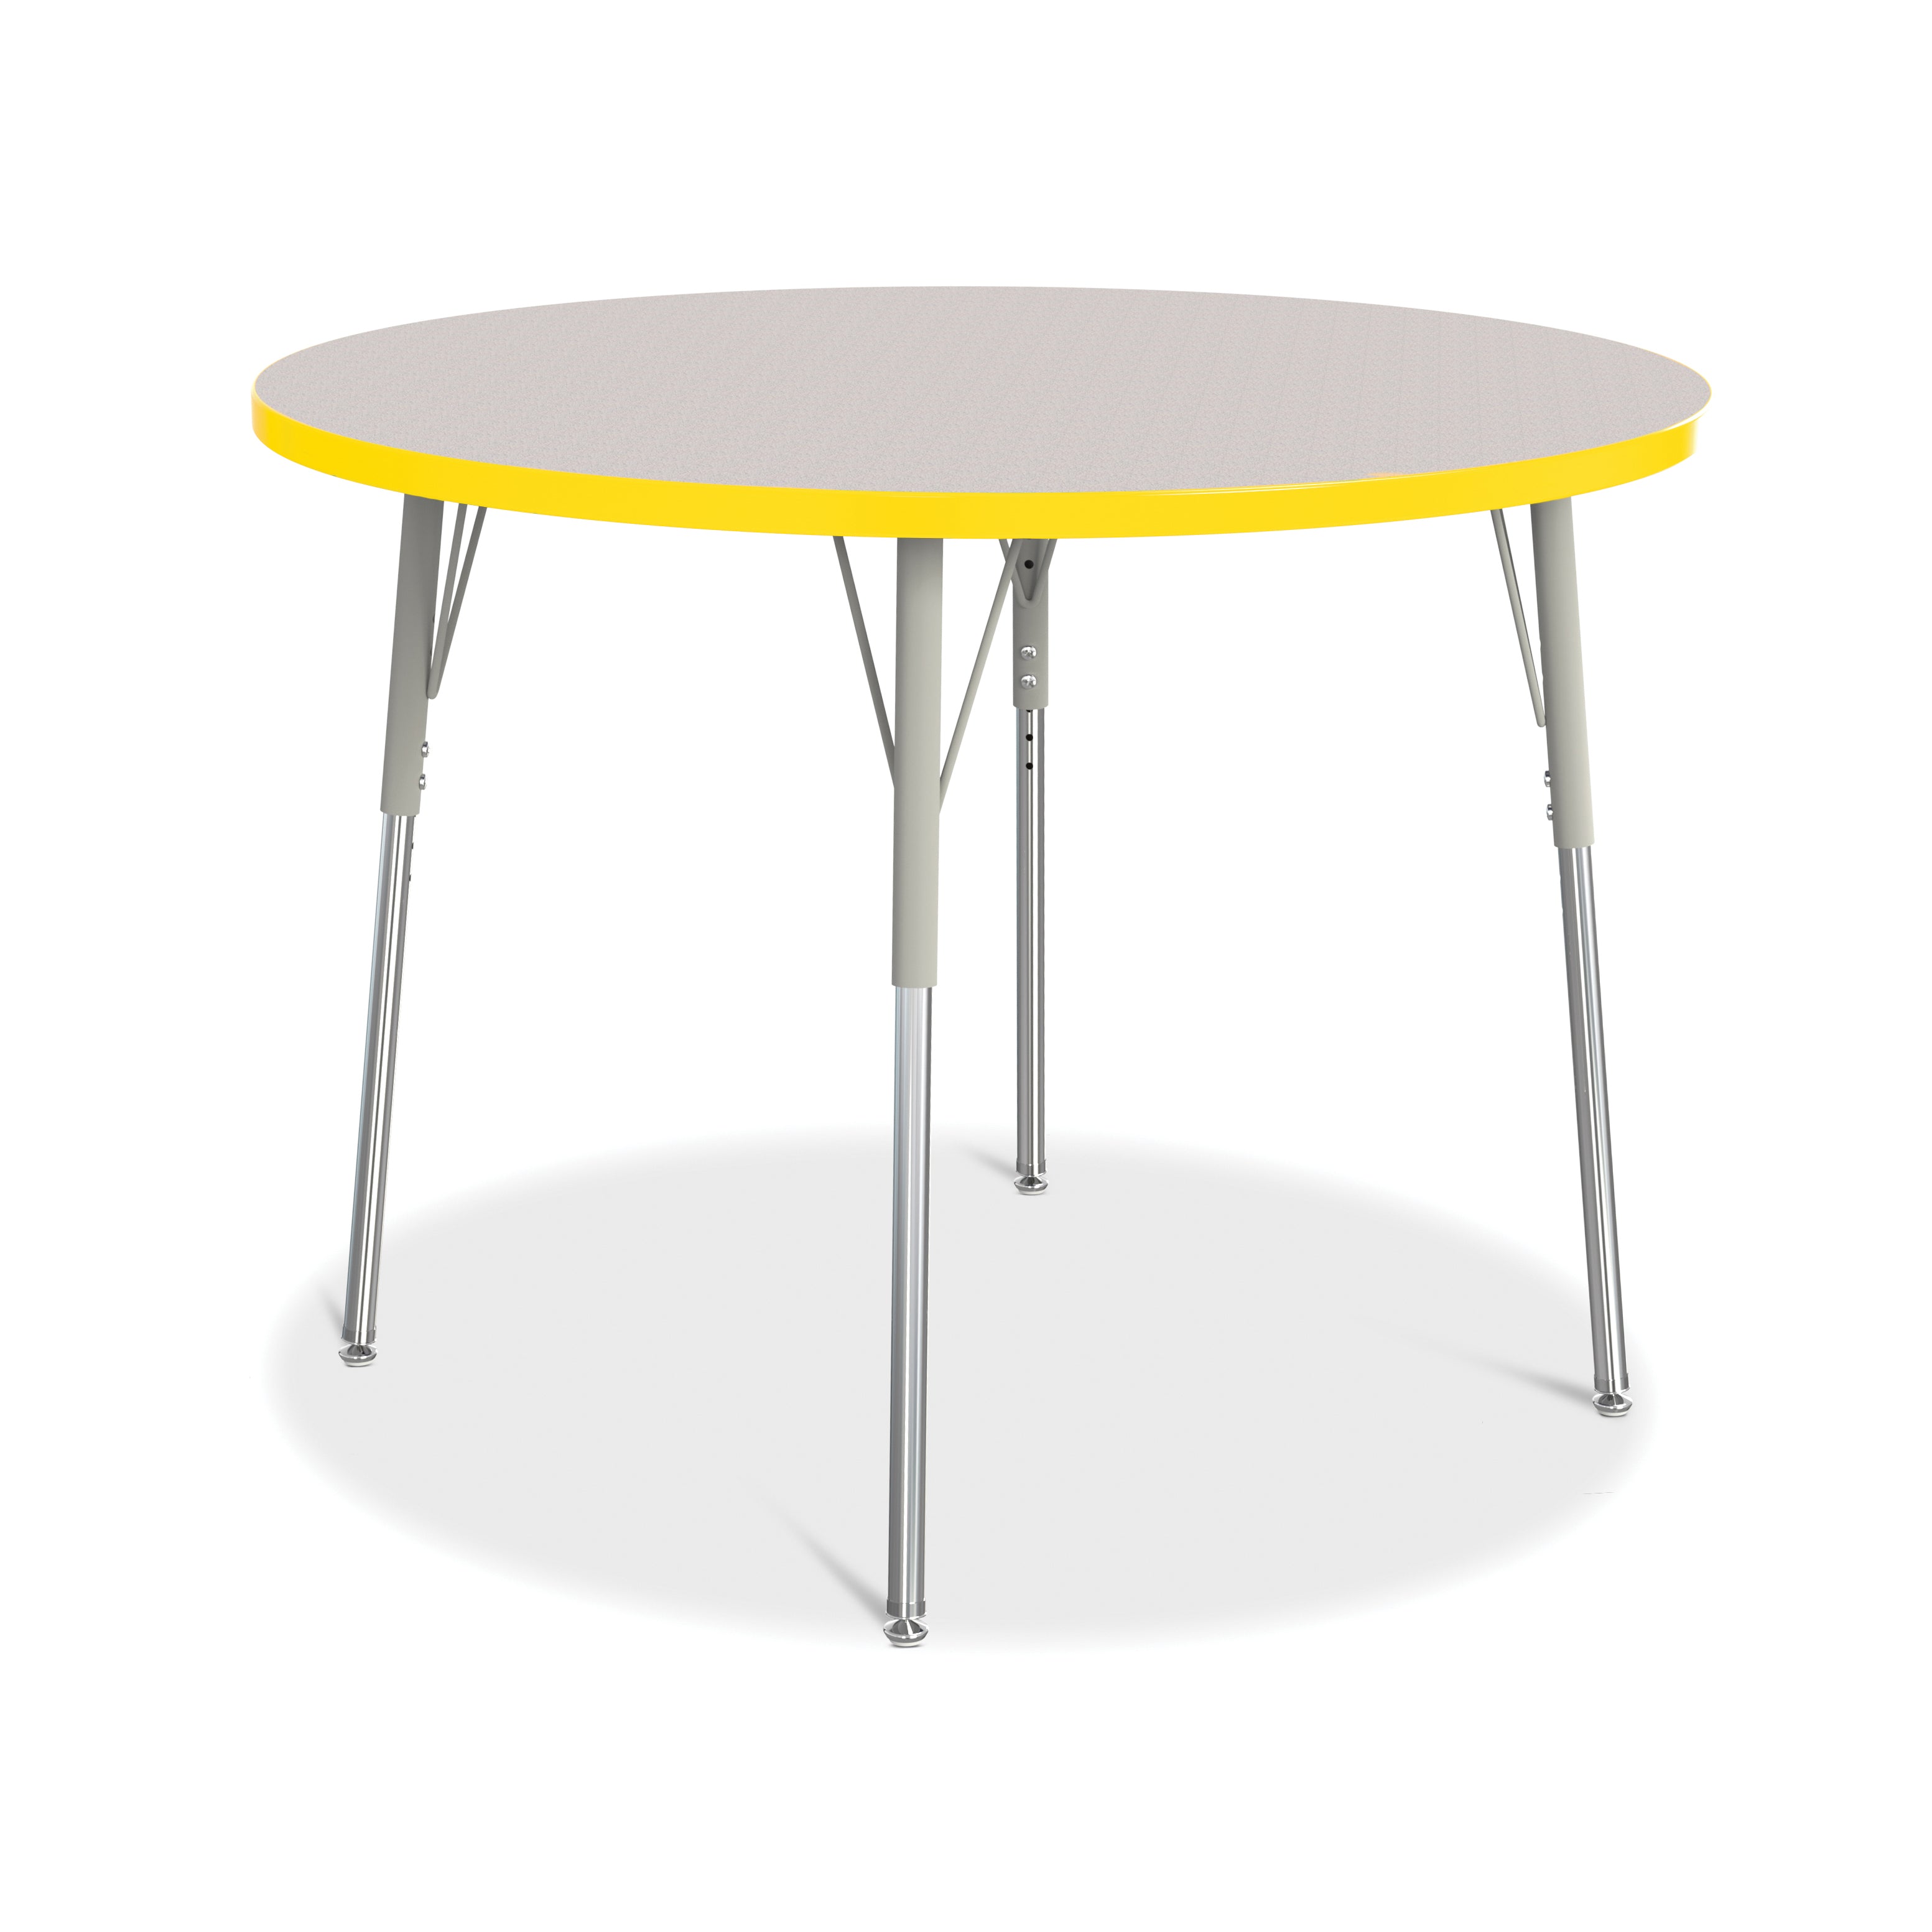 6468JCA007, Berries Round Activity Table - 42" Diameter, A-height - Freckled Gray/Yellow/Gray